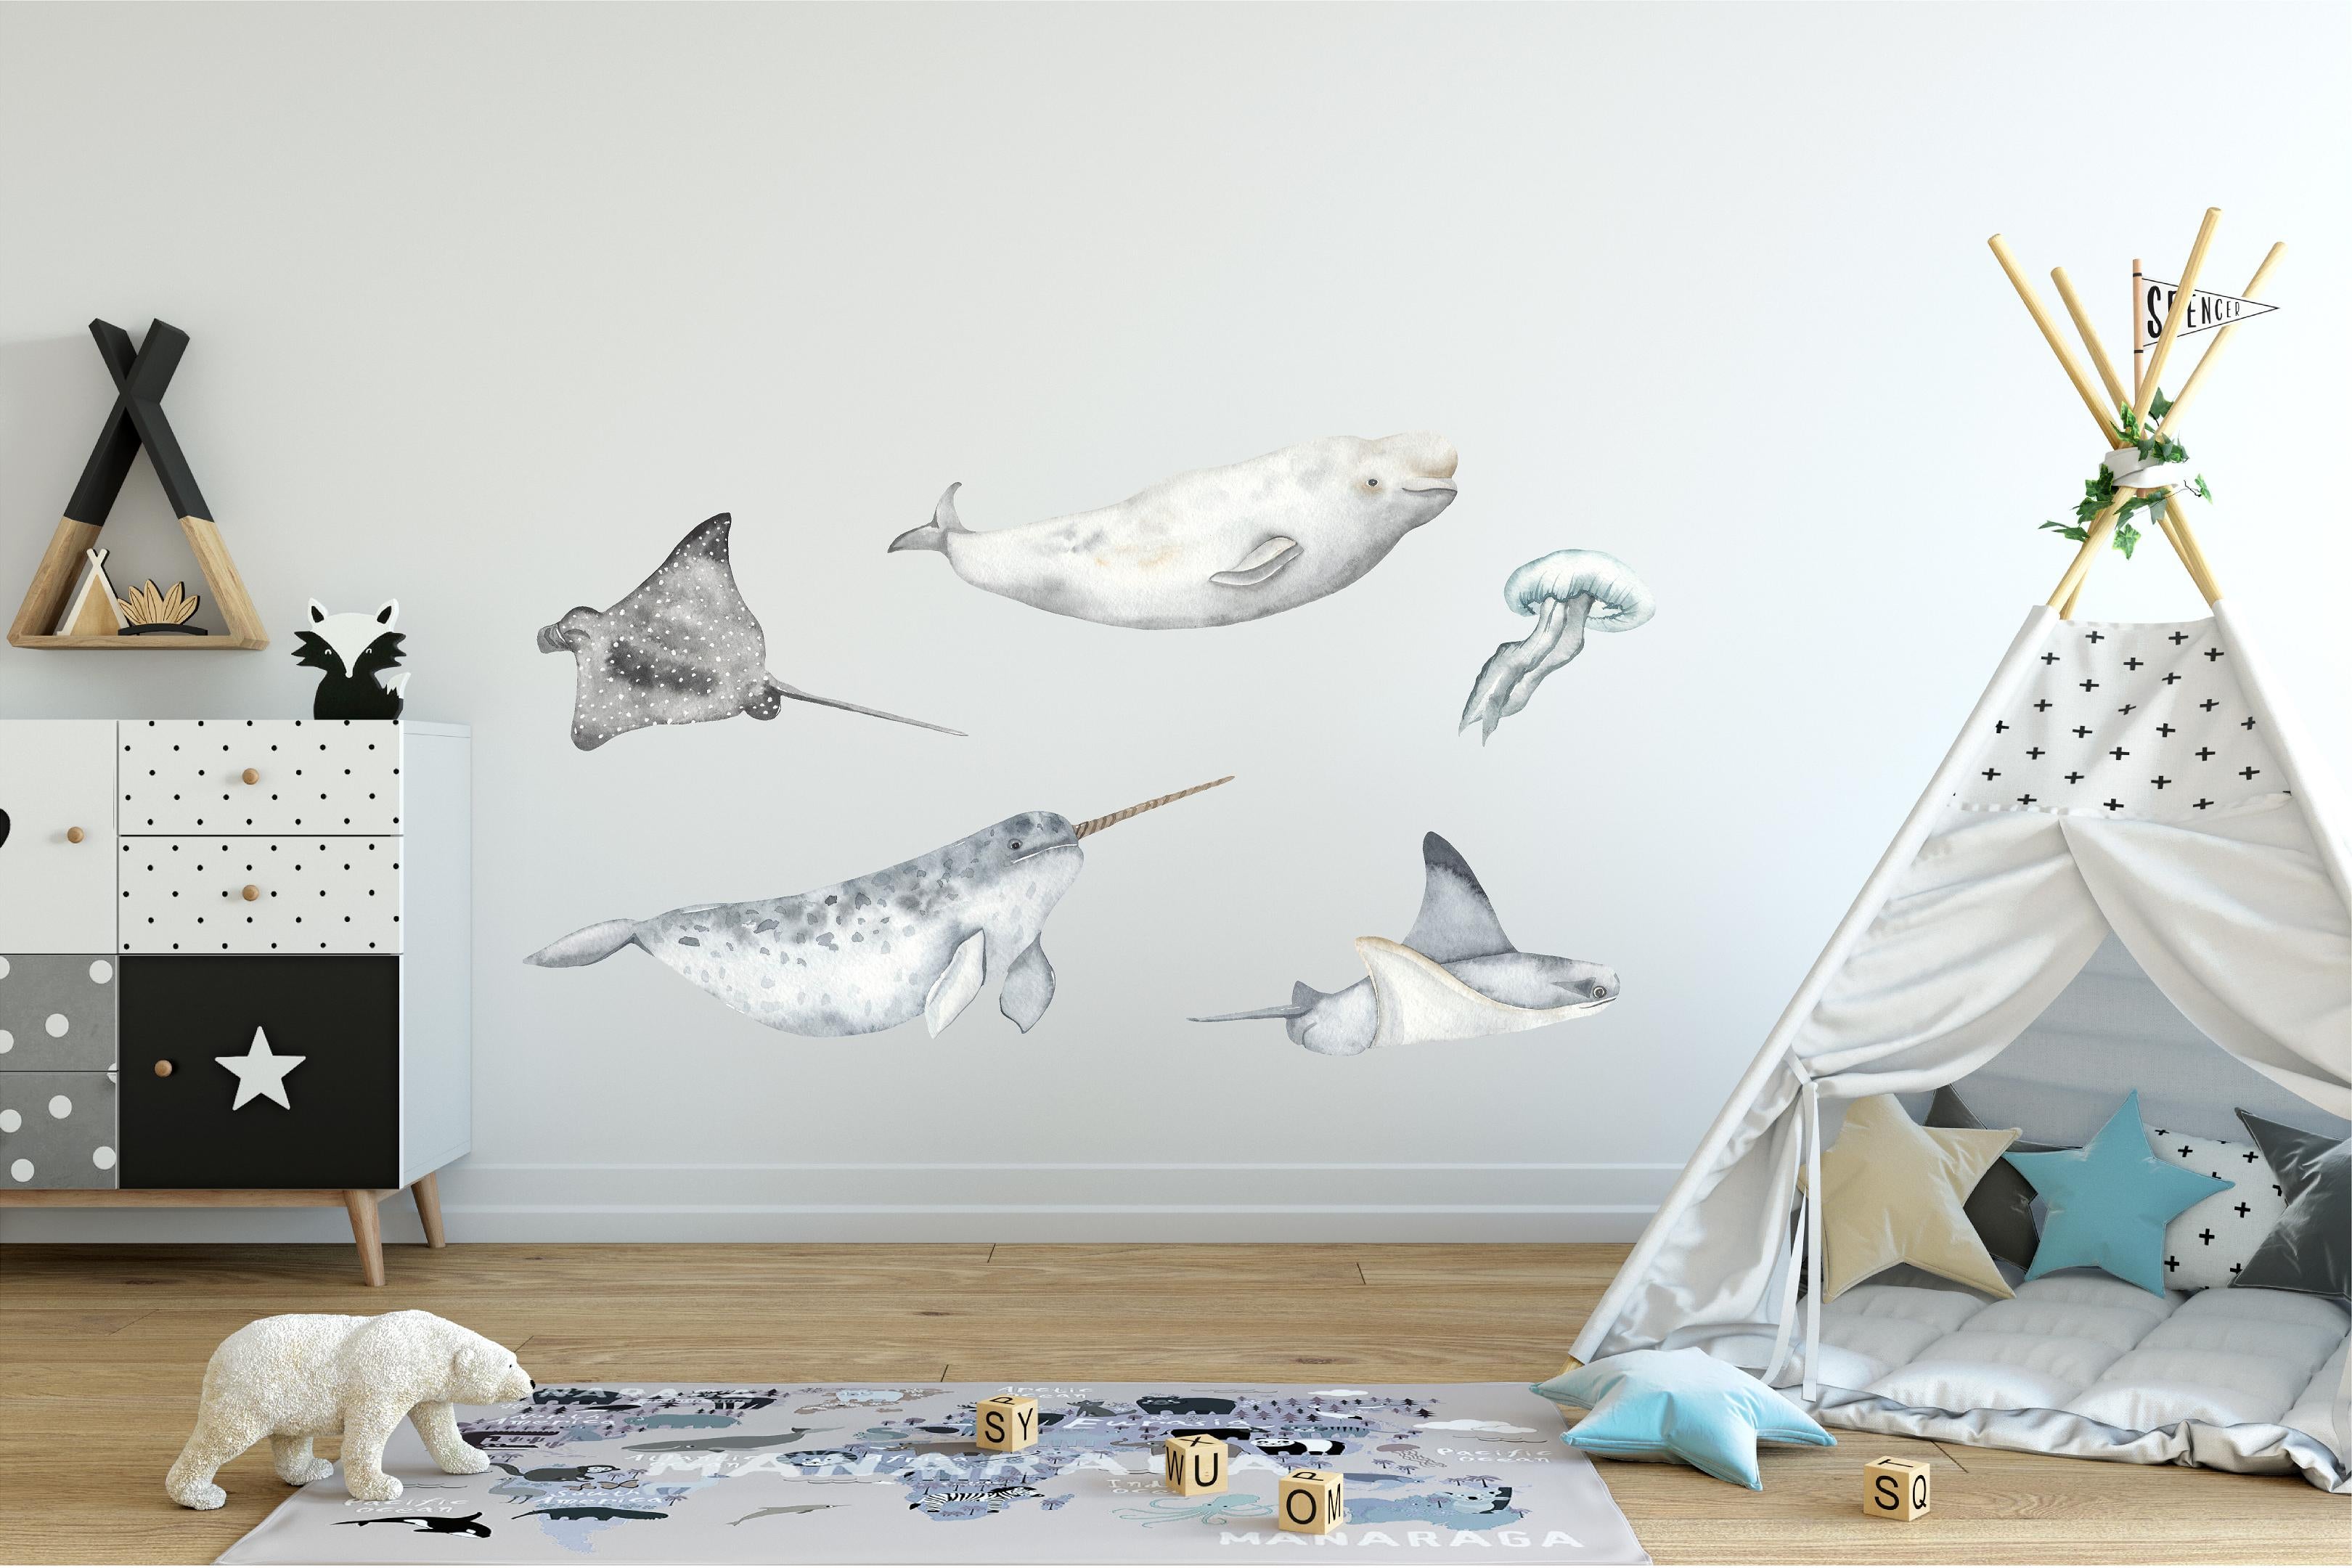 Gray Marine Life Set #3 Wall Decal Ocean Sea Life Removable Fabric Wall Sticker | DecalBaby